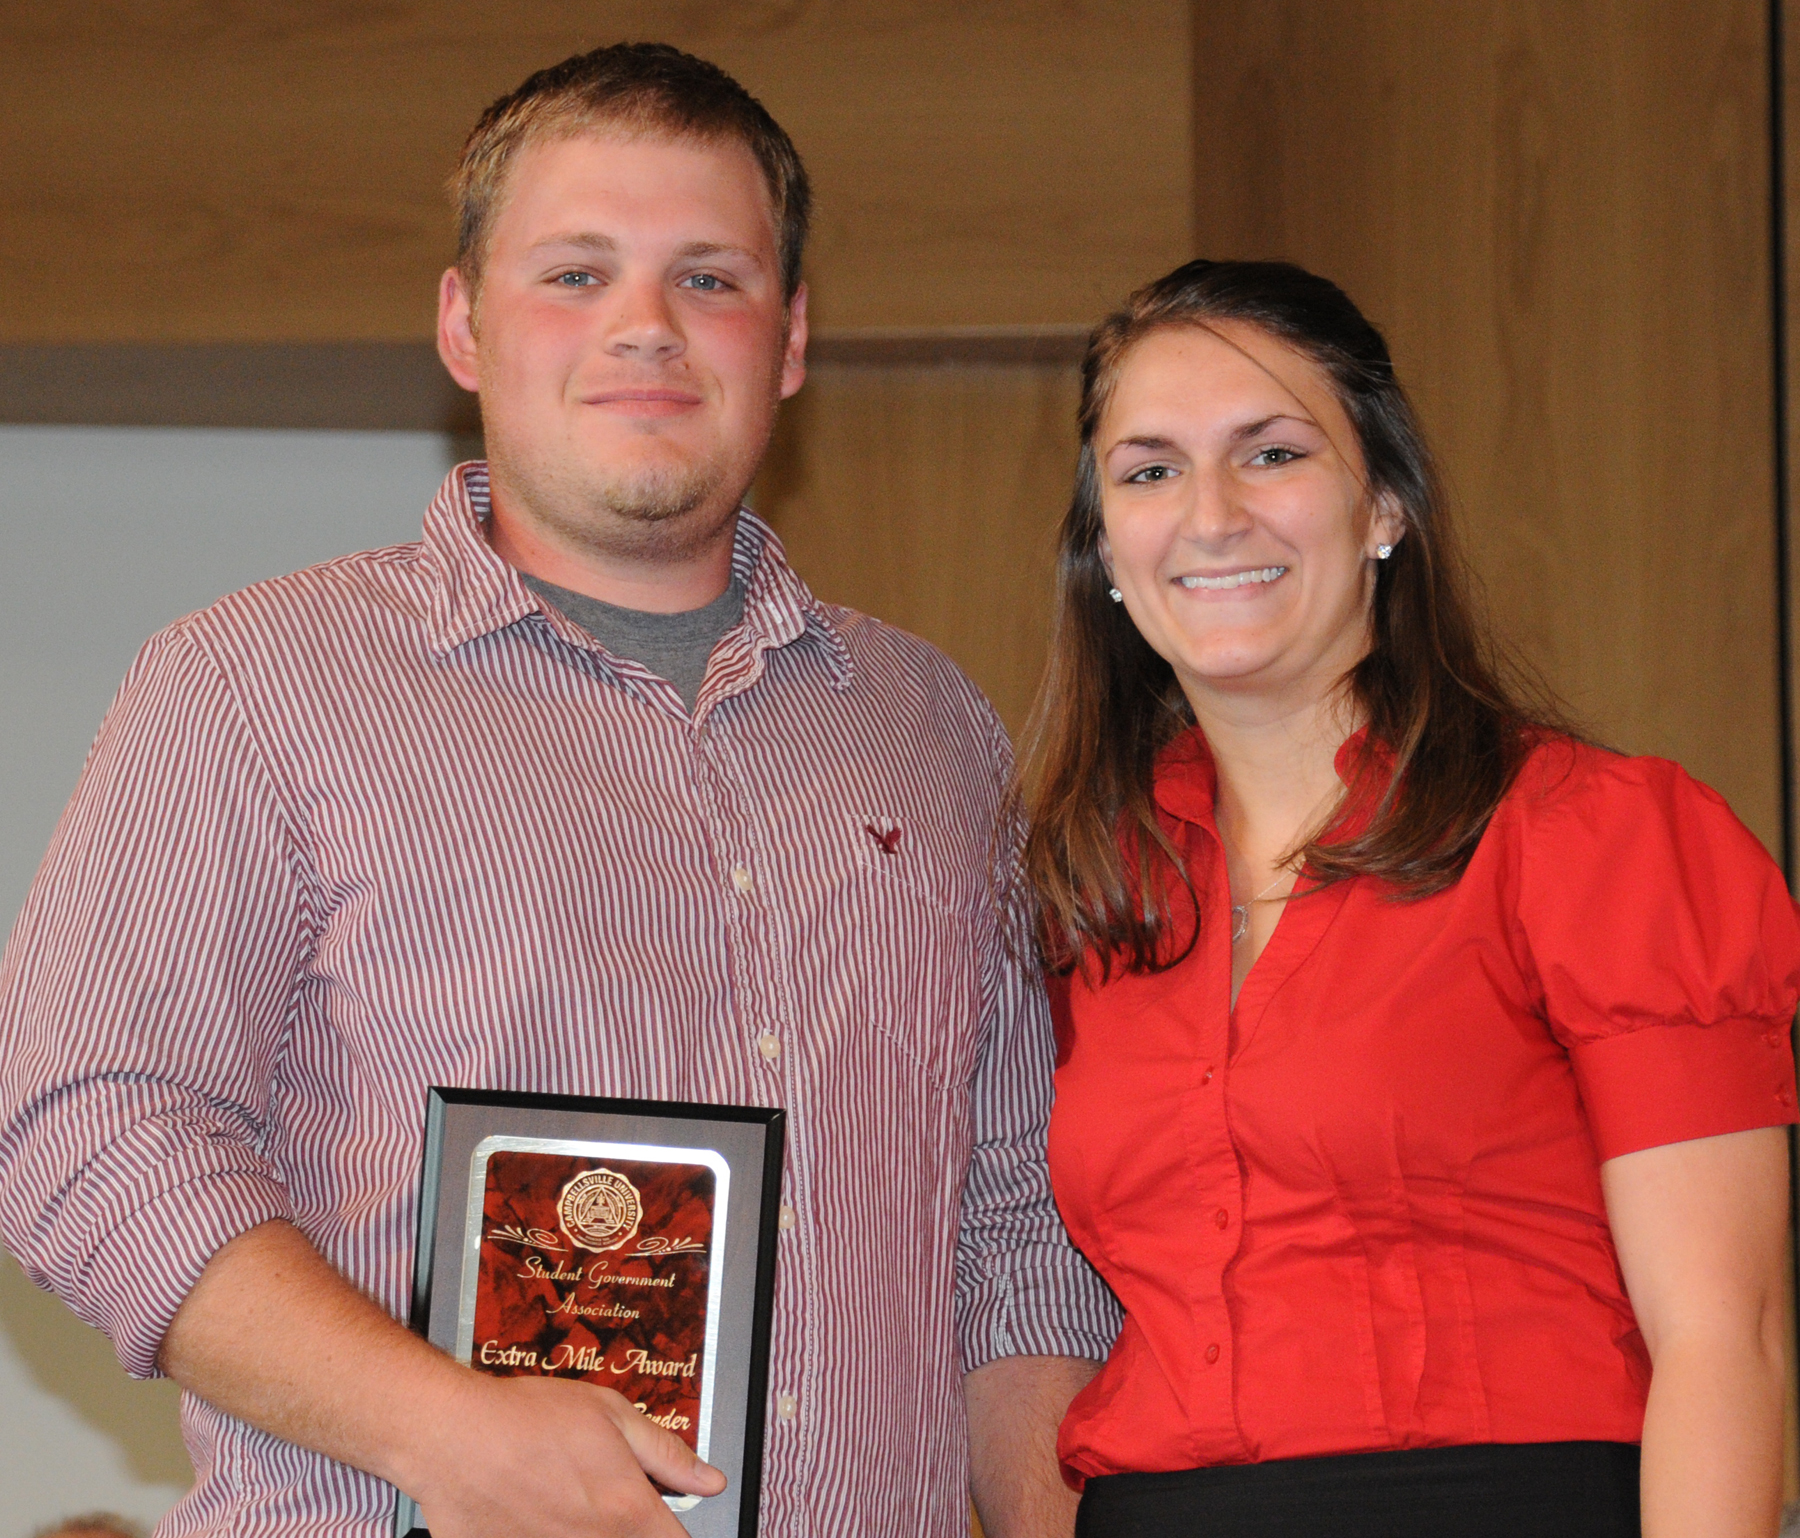 Robert Bender receives the SGA Student Extra Mile Award from Christina Miller, SGA president. (CU Photo by Ashley Zsedenyi)